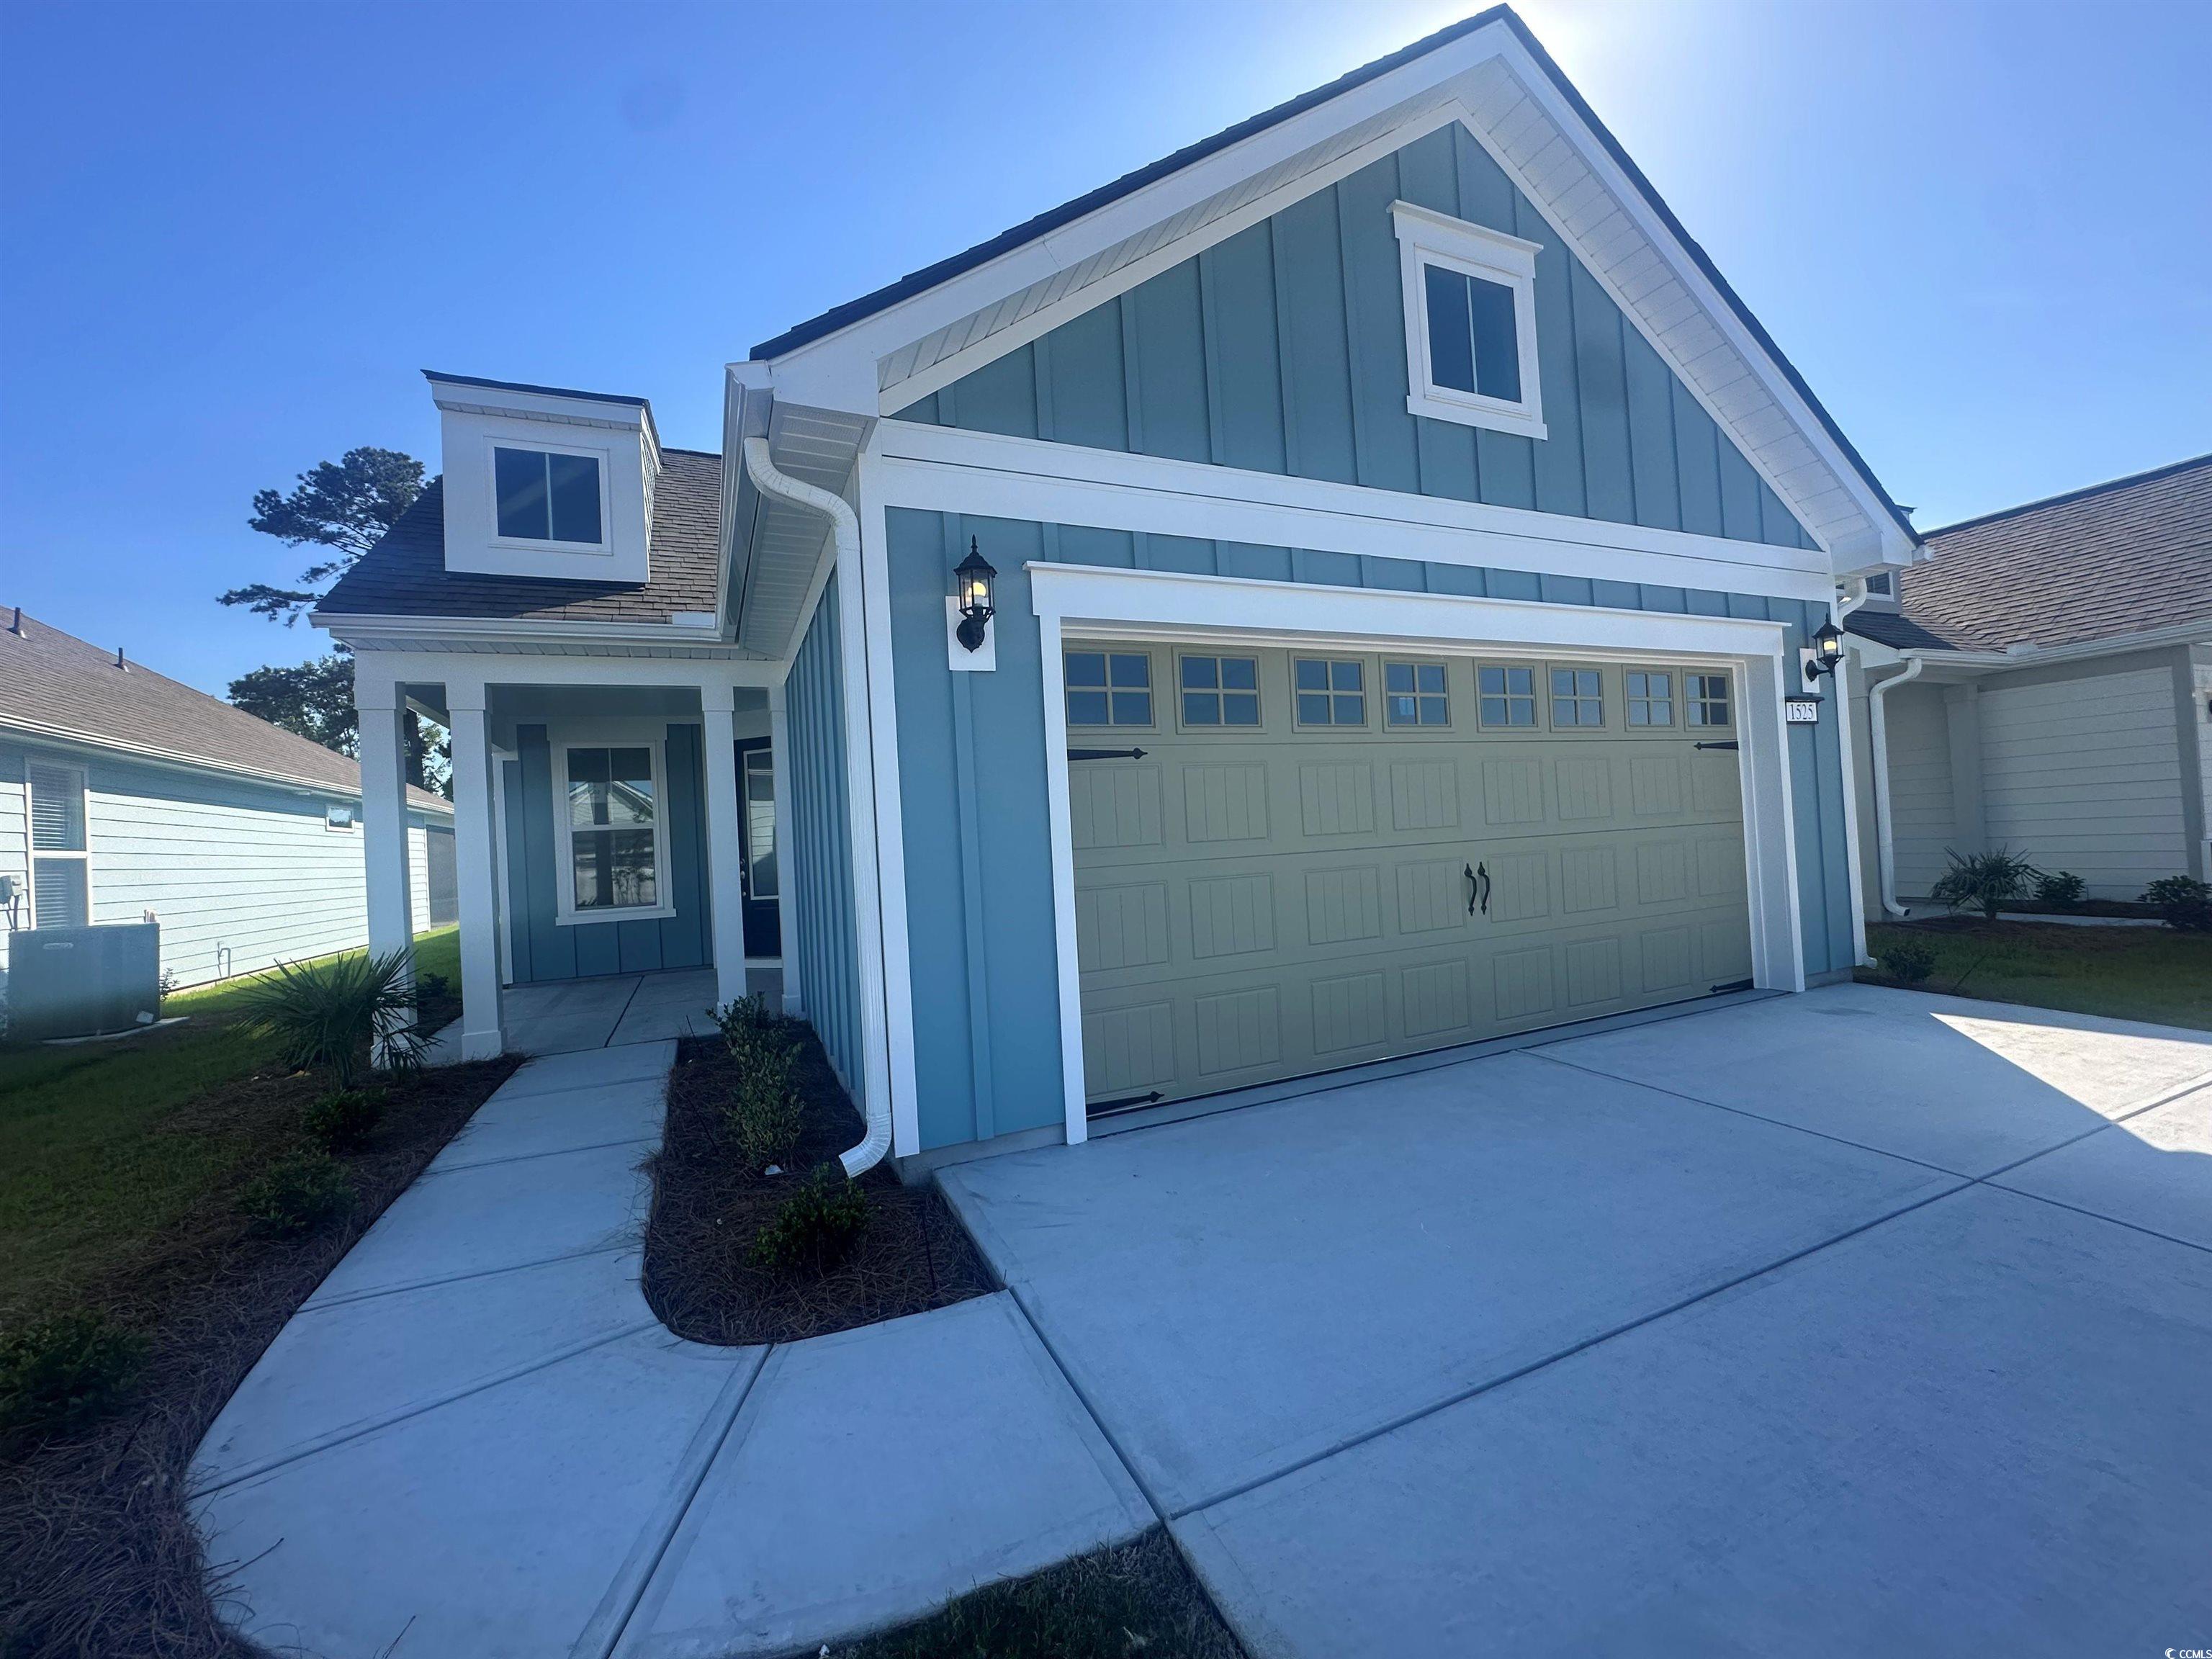 ****ask about special builder closing cost incentives***** new construction - move in ready june 2024. all new 55+ lifestyle community, age restricted, central north myrtle beach, just a mile from the ocean.  golf cart friendly, pets/fences allowed.  amenities/clubhouse, yard care, high-speed internet and cable included in monthly hoa.  < 500 homes upon completion, build to suit, choice of 10 customizable floorplans.  detached low-country, single-level floorplans, 2 - 4 bedroom homes with 2-3 car garage options.  monthly events/activity calendar provided by full-time lifestyle director, and amenity center/clubhouse scheduled to be completed summer 2023 and will include indoor lap pool, outdoor salt water pool/hot tub, 8 pickleball courts, fitness center, bocce courts, putting green and 5 foot sidewalks both sides of the street throughout the community! < 5 minutes to city community center, sports complex, aquatics & fitness center and crescent beach public beach access.  dog park, marinas, rv parks/storage, golf courses, dining, grocery, medical facilities and more within 15 minutes.   myrtle beach international airport < 30 minutes away!  you cannot beat this location!